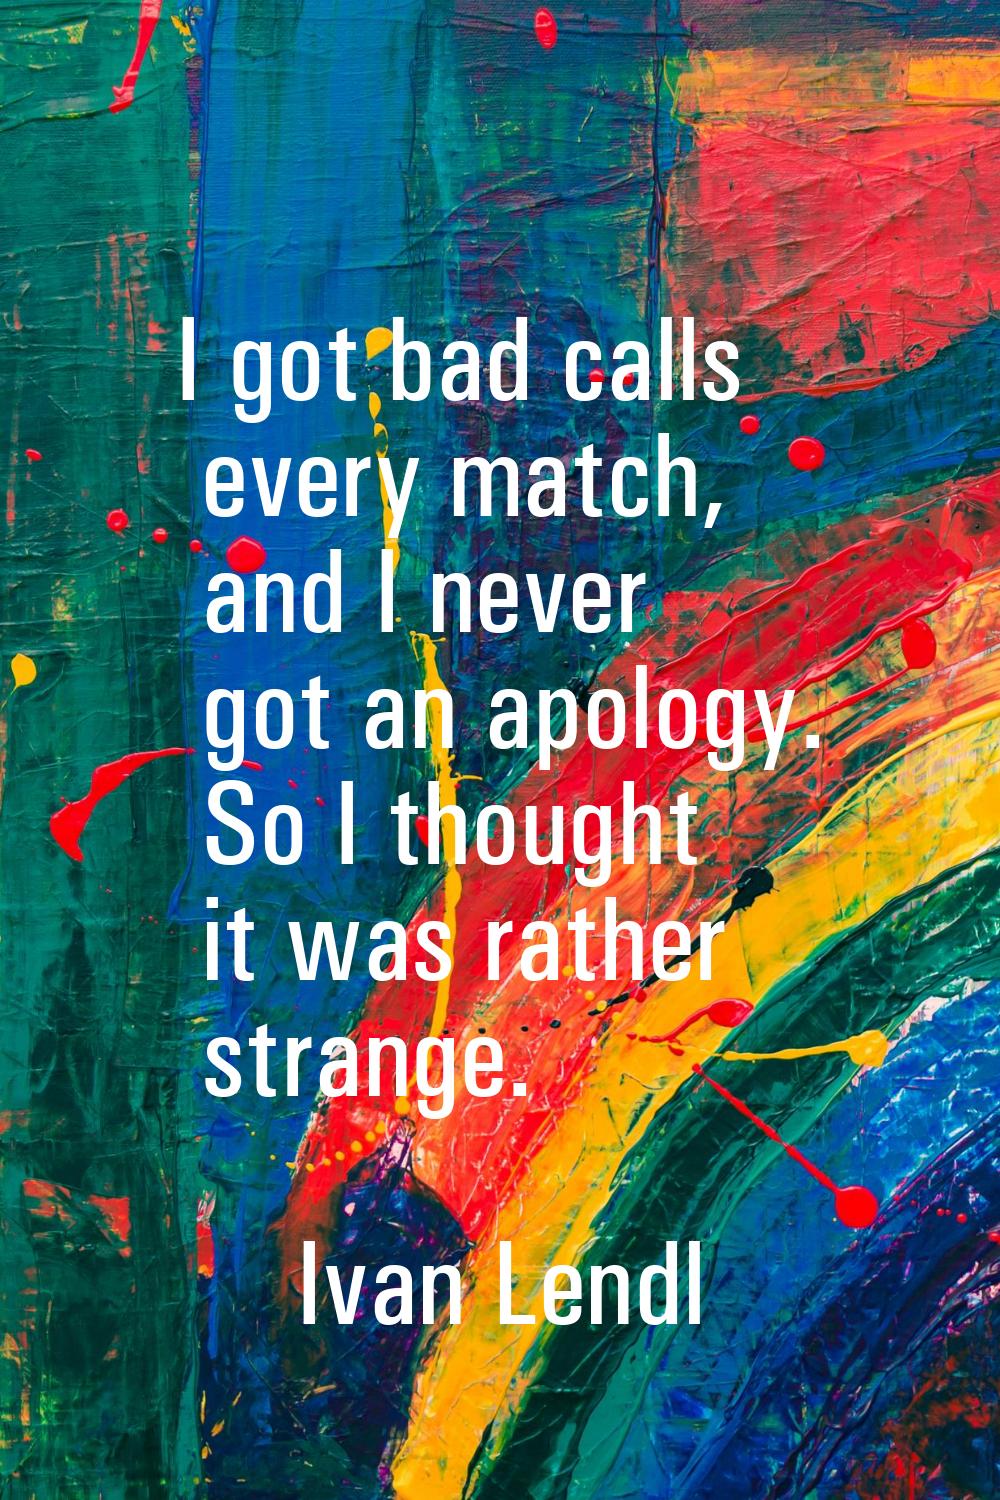 I got bad calls every match, and I never got an apology. So I thought it was rather strange.